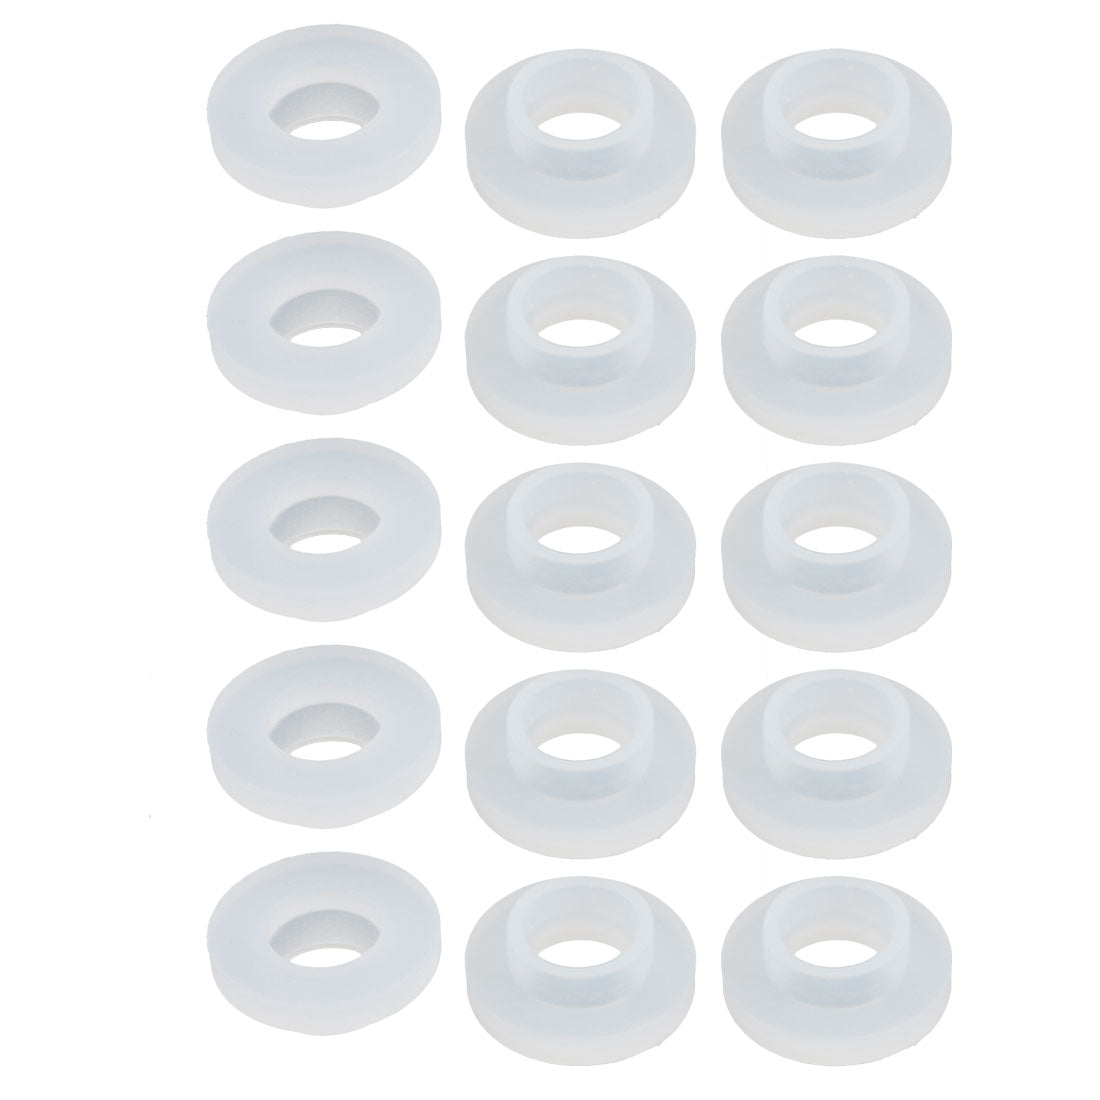 Uxcell Uxcell 15pcs White Silica Gel Round Flat Washers Assortment Size 10x19x3mm